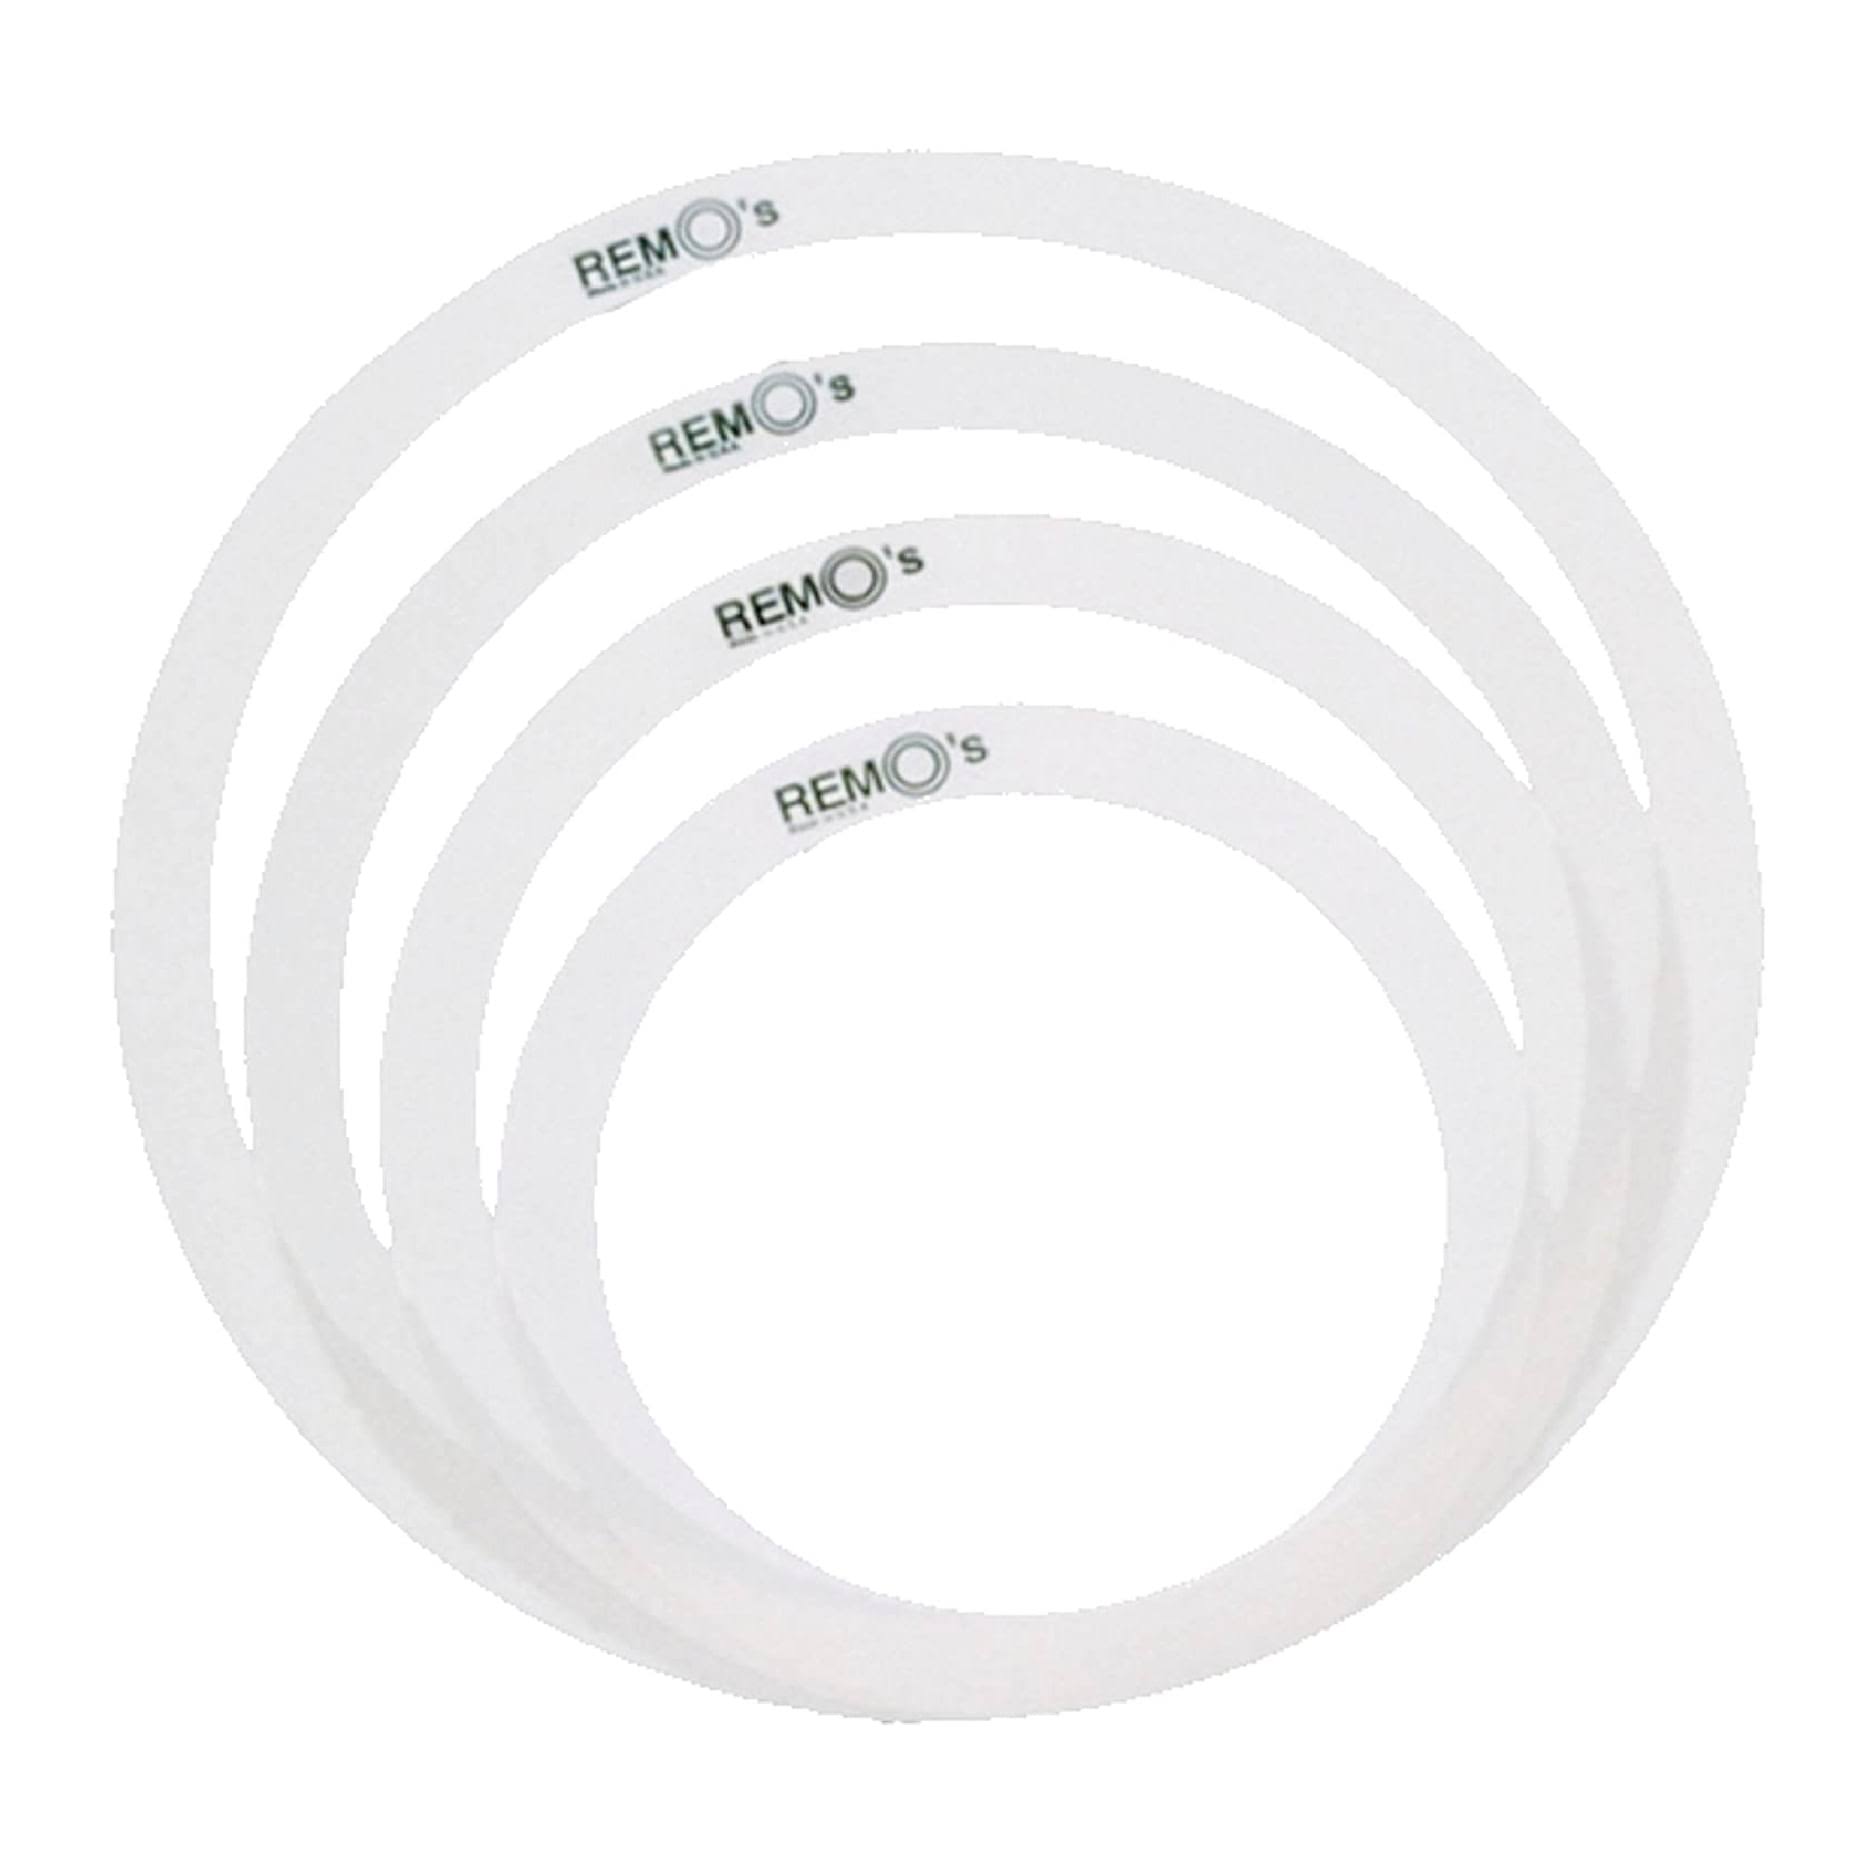 Remo RemOs Tone Control Ring Pack - 10", 12", 14", 16"